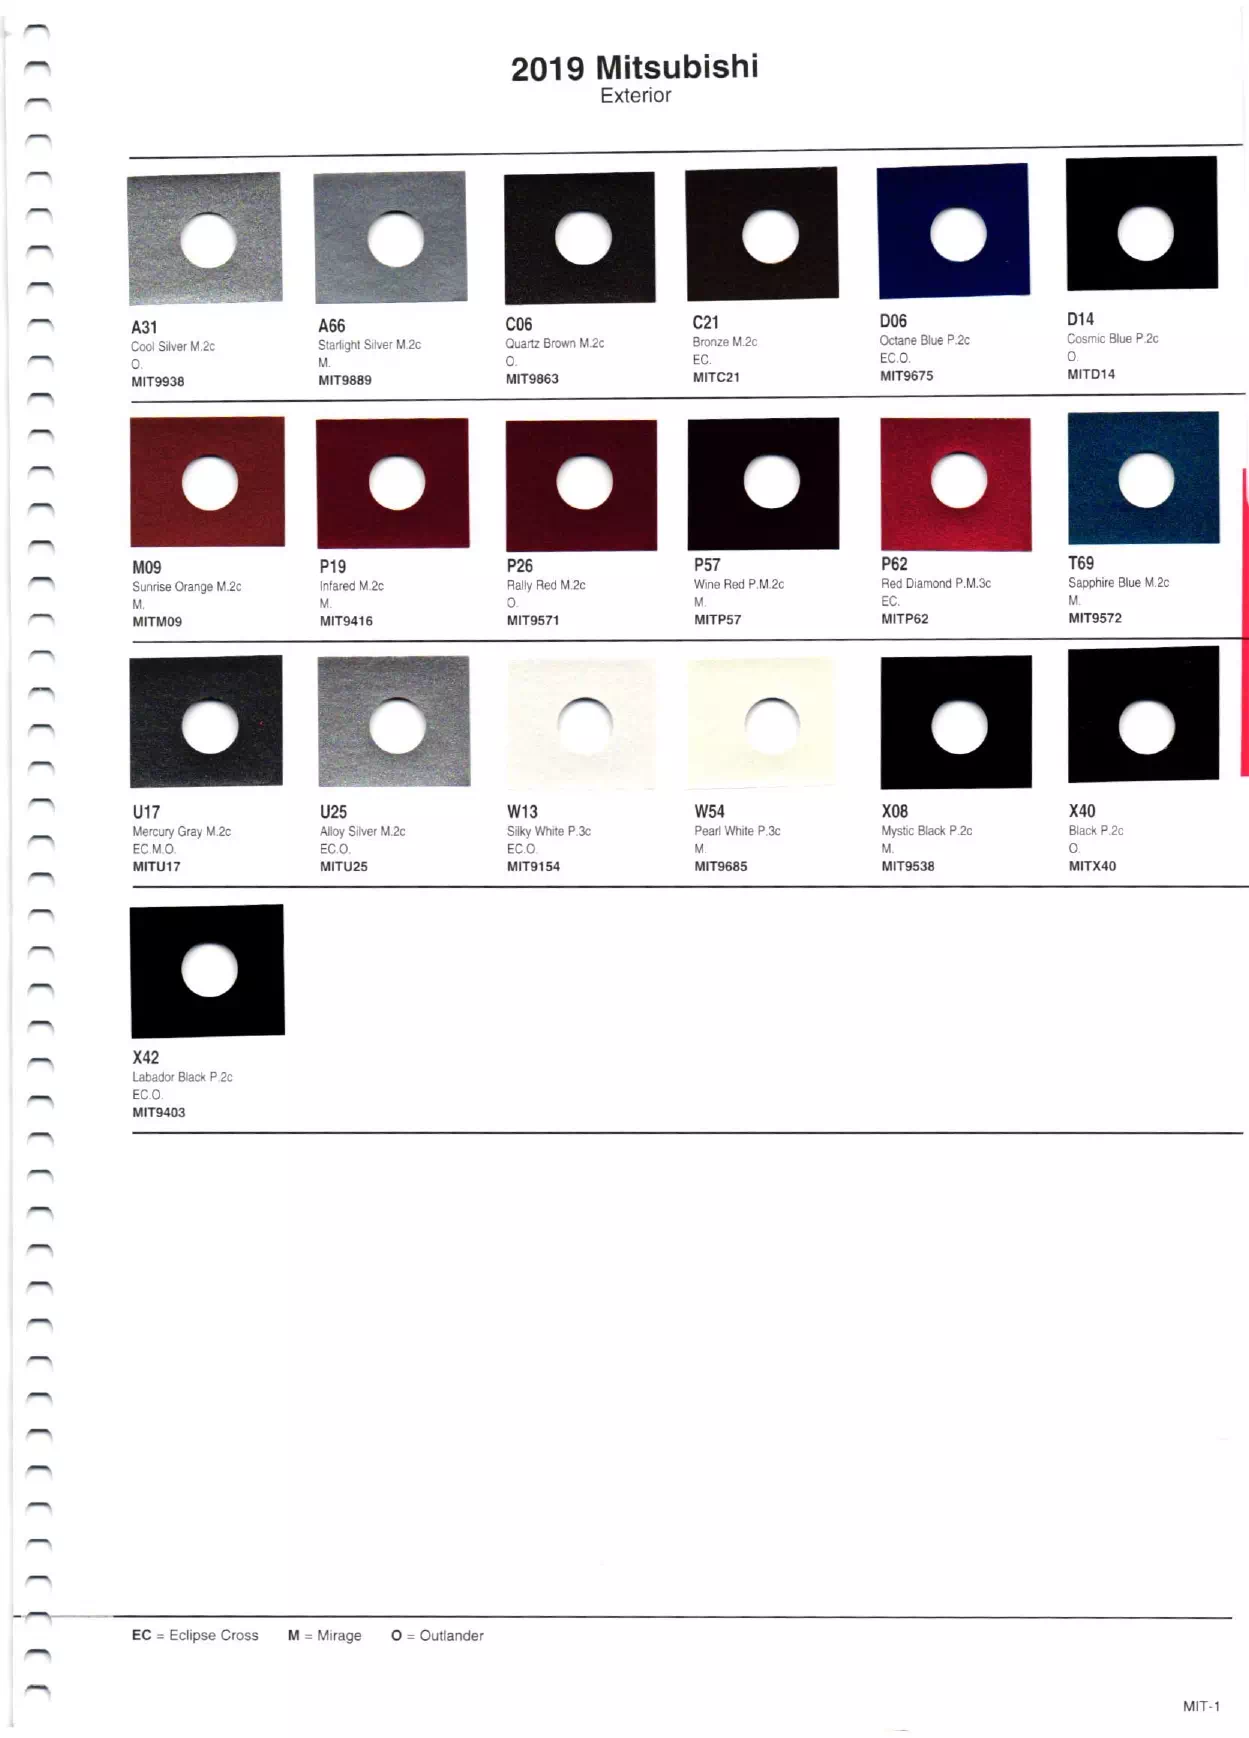 a paint chart that shows codes, color names and paint swatches for the oe paint colors for 2019 mitsubishi vehicles.